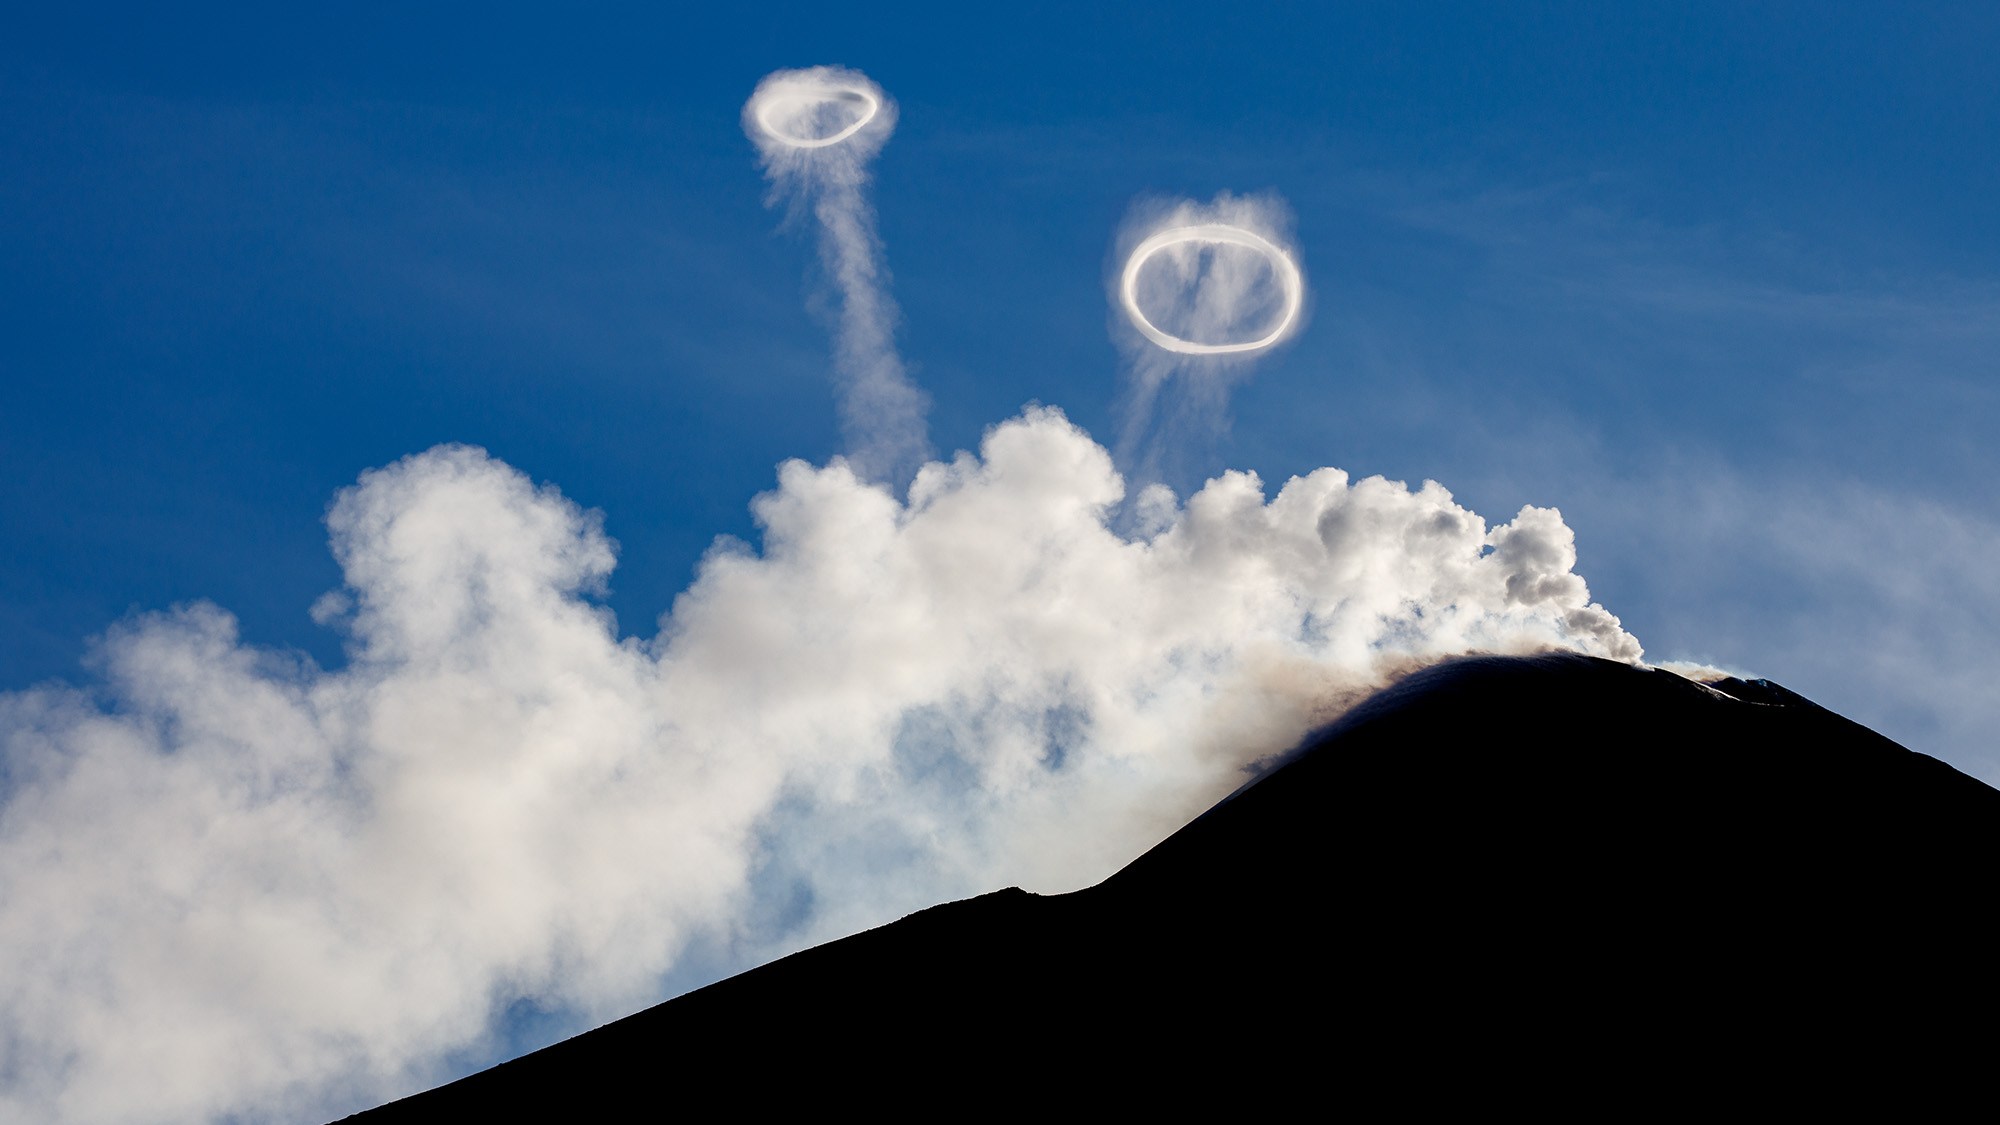 Vortex rings, seen rising from Mount Etna, actually help prevent a violent volcanic eruption